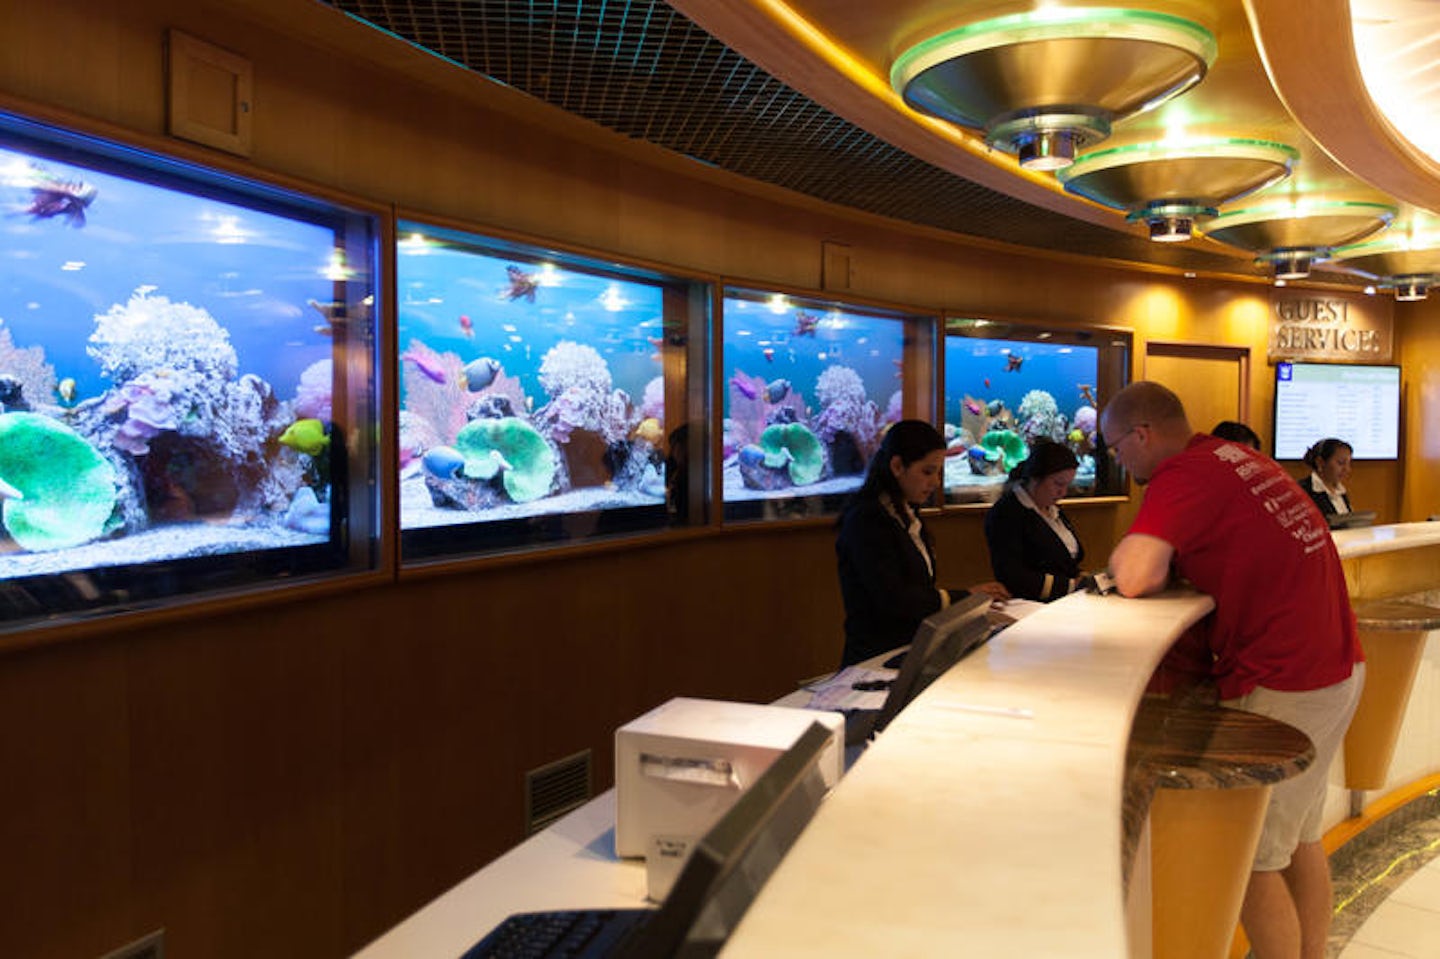 Guest Services on Independence of the Seas